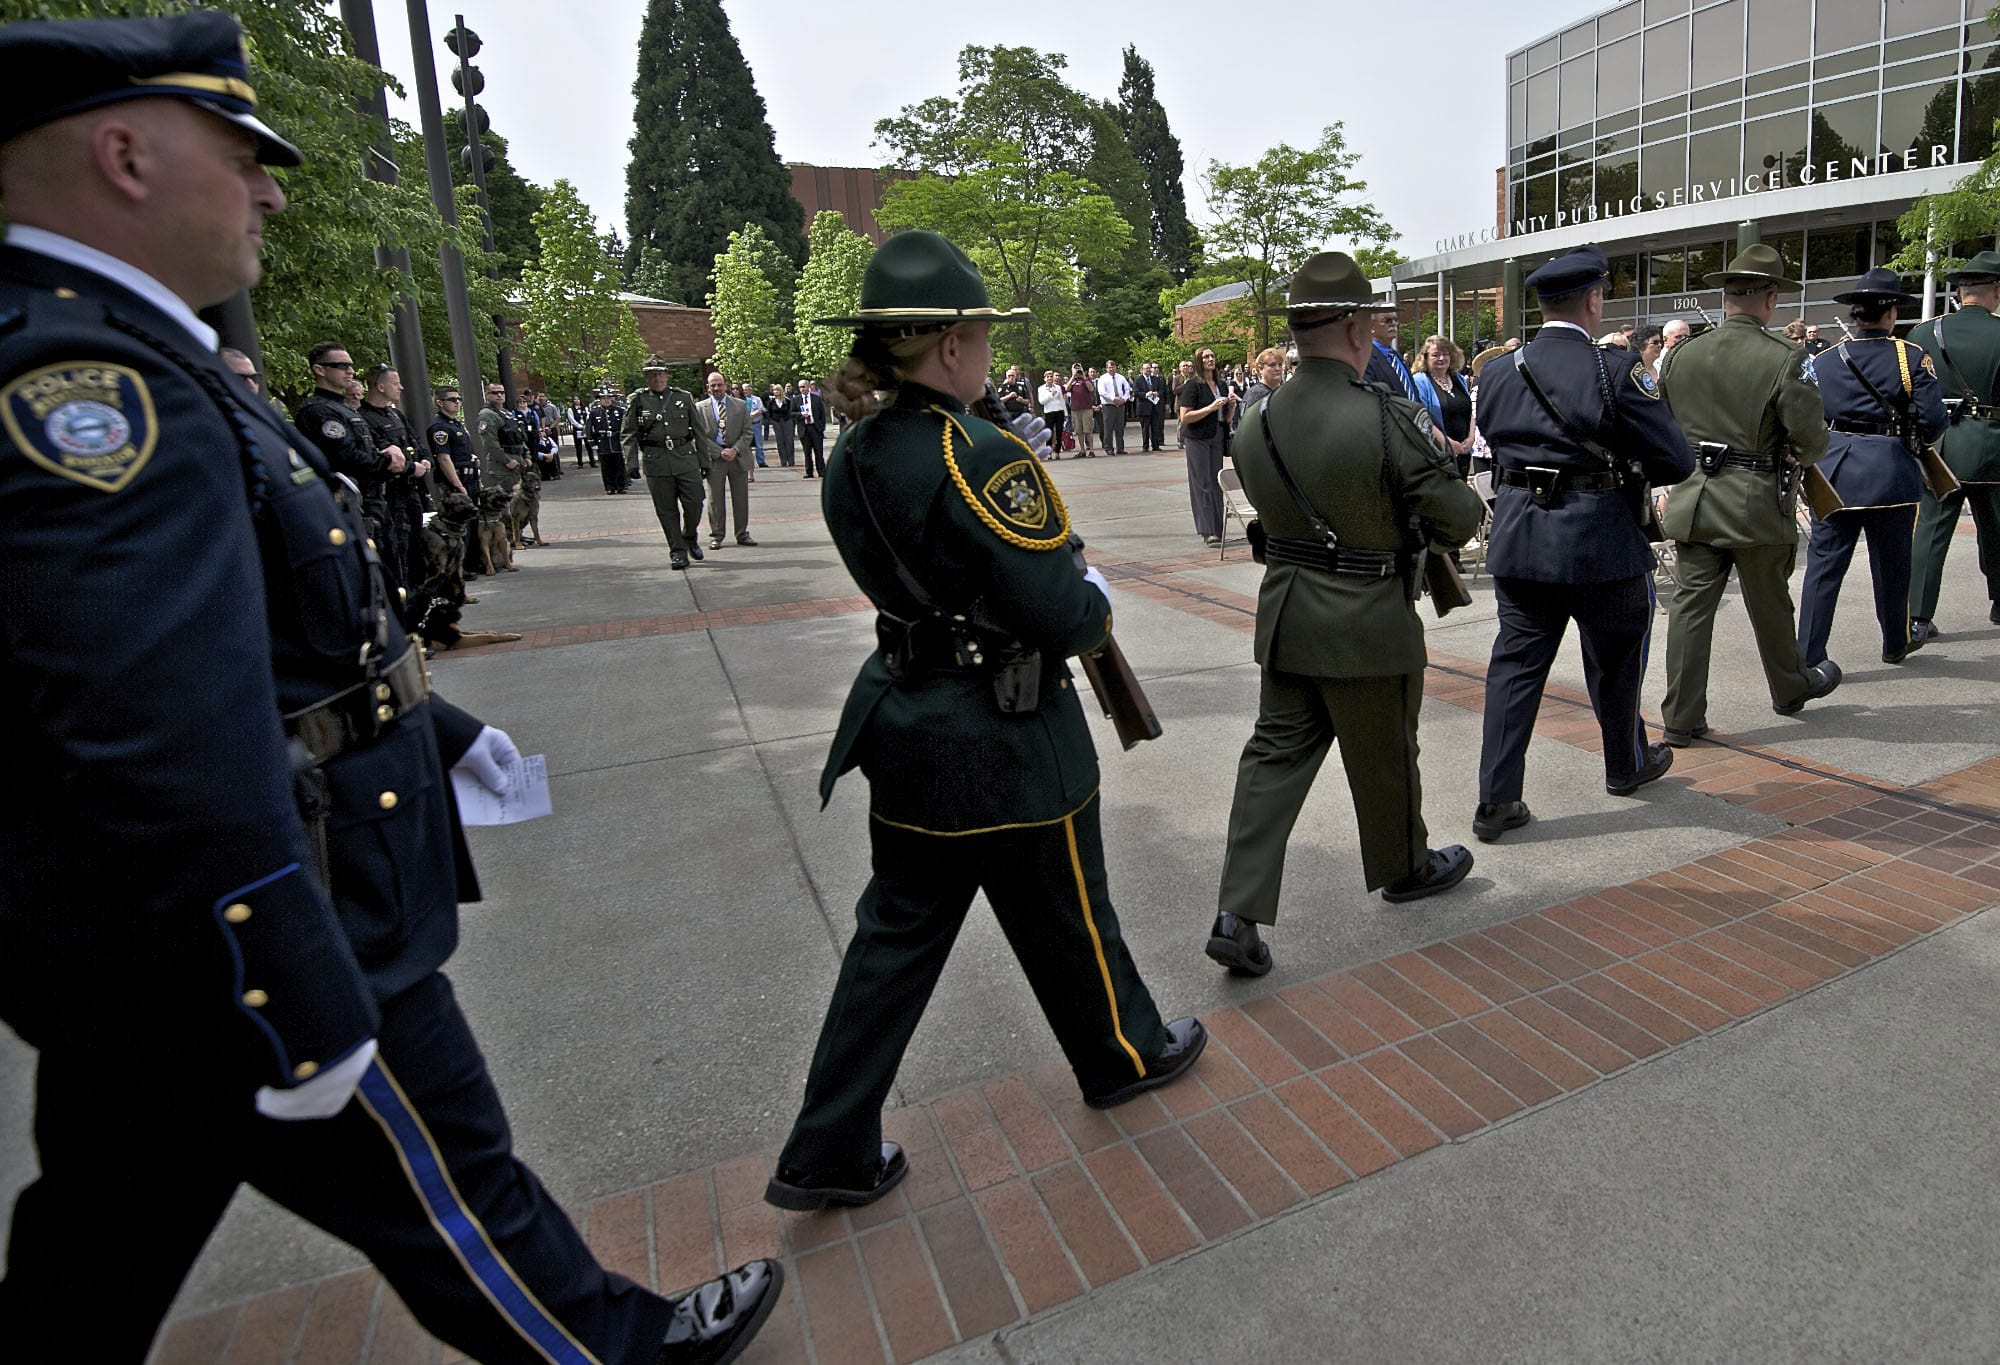 A multi-agency Honor Guard follows the posting of the colors during Thursday's Law Enforcement Memorial Ceremony in the courtyard of the Public Service Center in Vancouver.